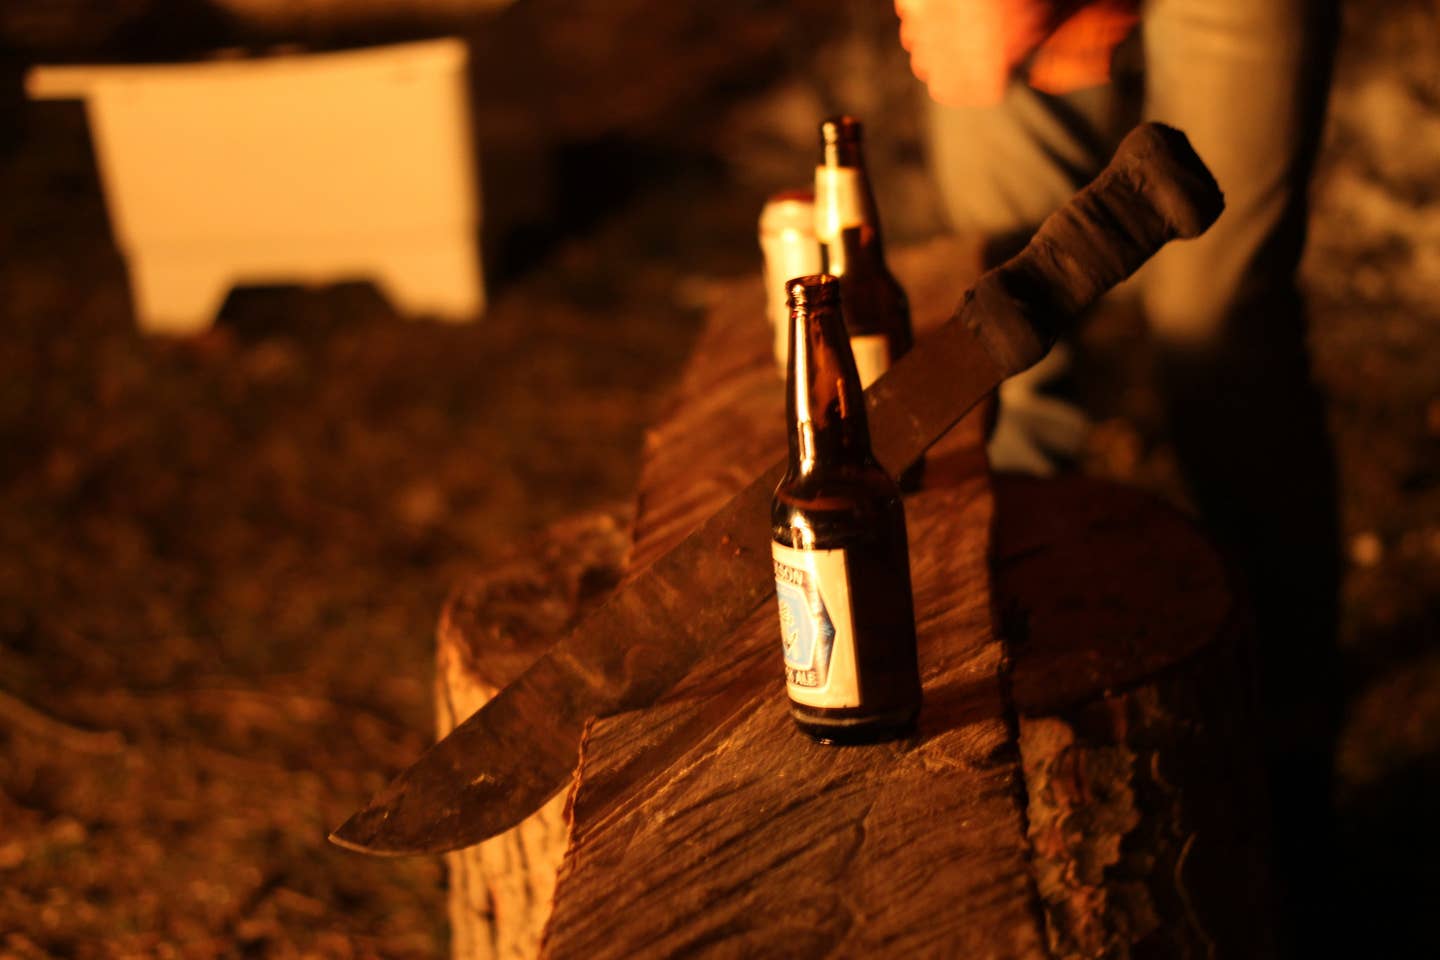 The science behind why beer tastes better outdoors